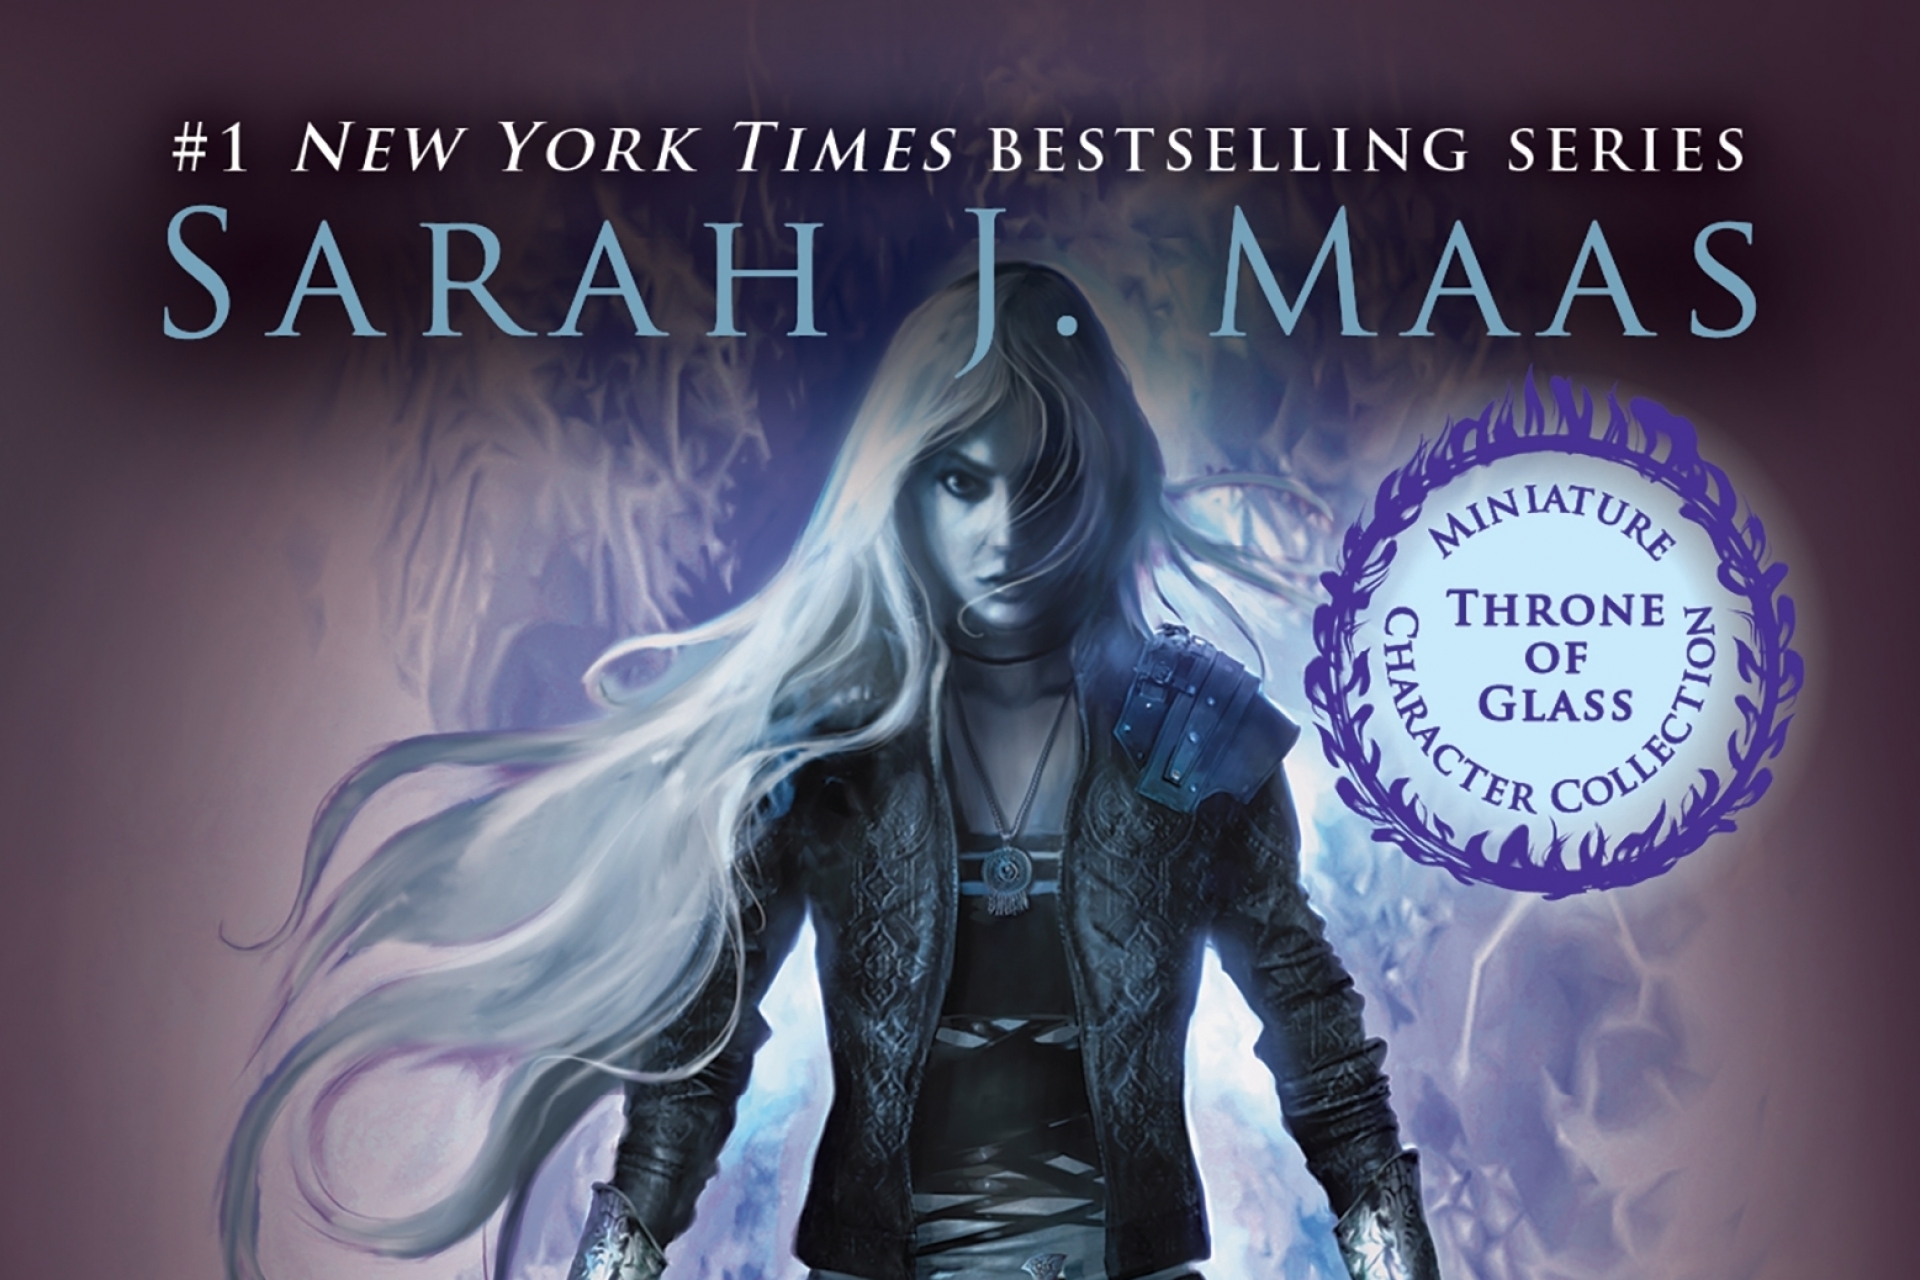 Throne of Glass - Series of the Month